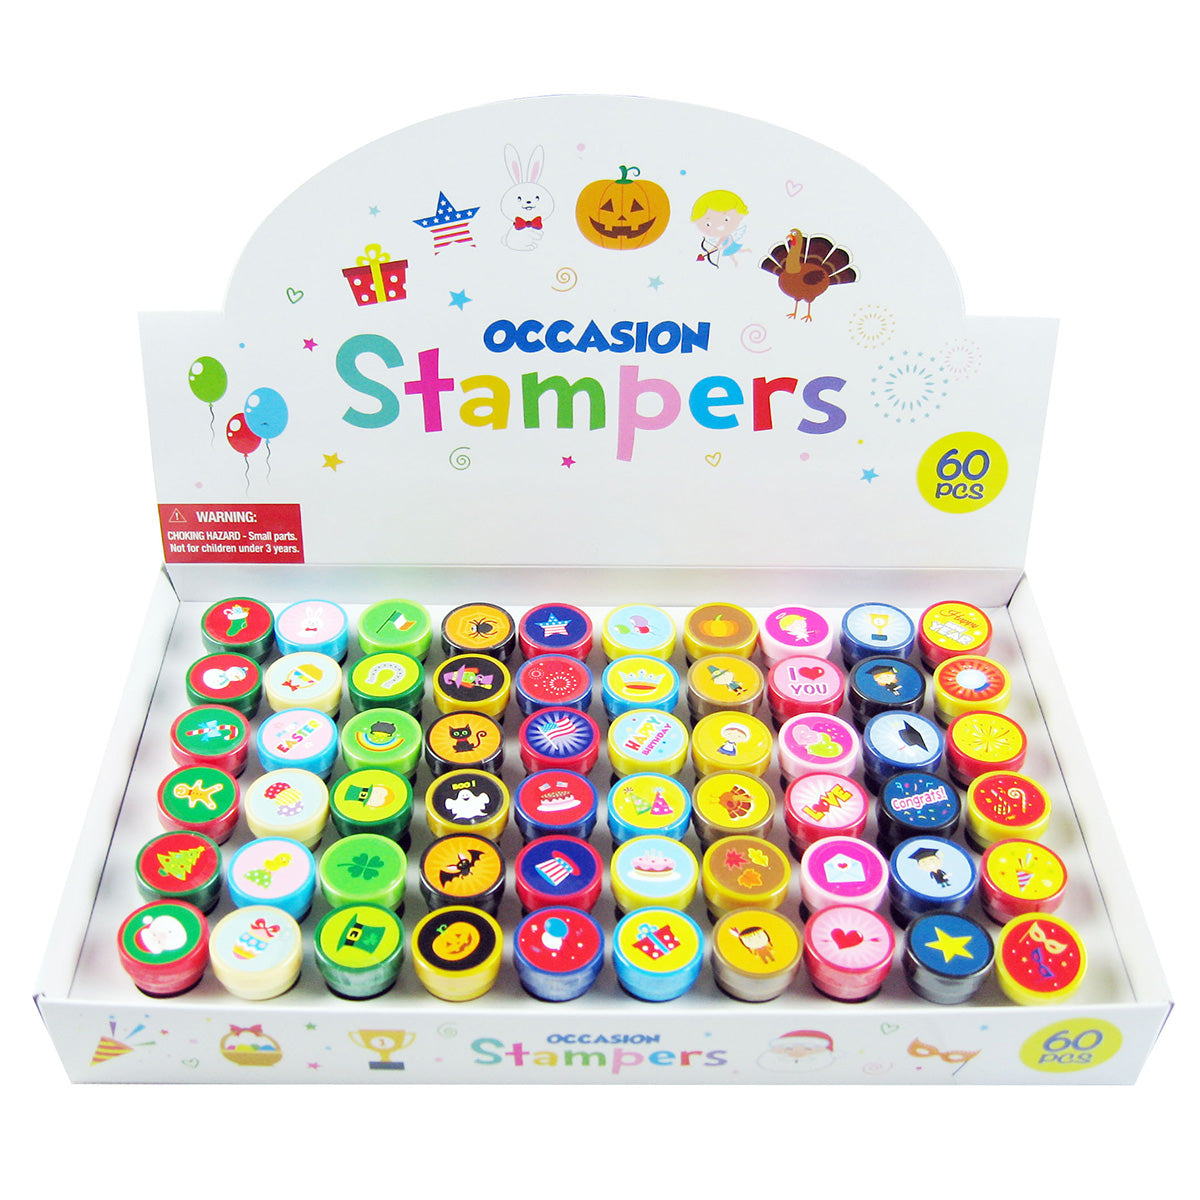  150 Pcs Assorted Stampers for Kids Stamp Set Cute Mini Stamps  Self Inking Stamp Kids Printing Stamping Supplies Birthday Party Favors for  Crafts Classroom Prize, Animals, Fruits, Food, Human Tasks 